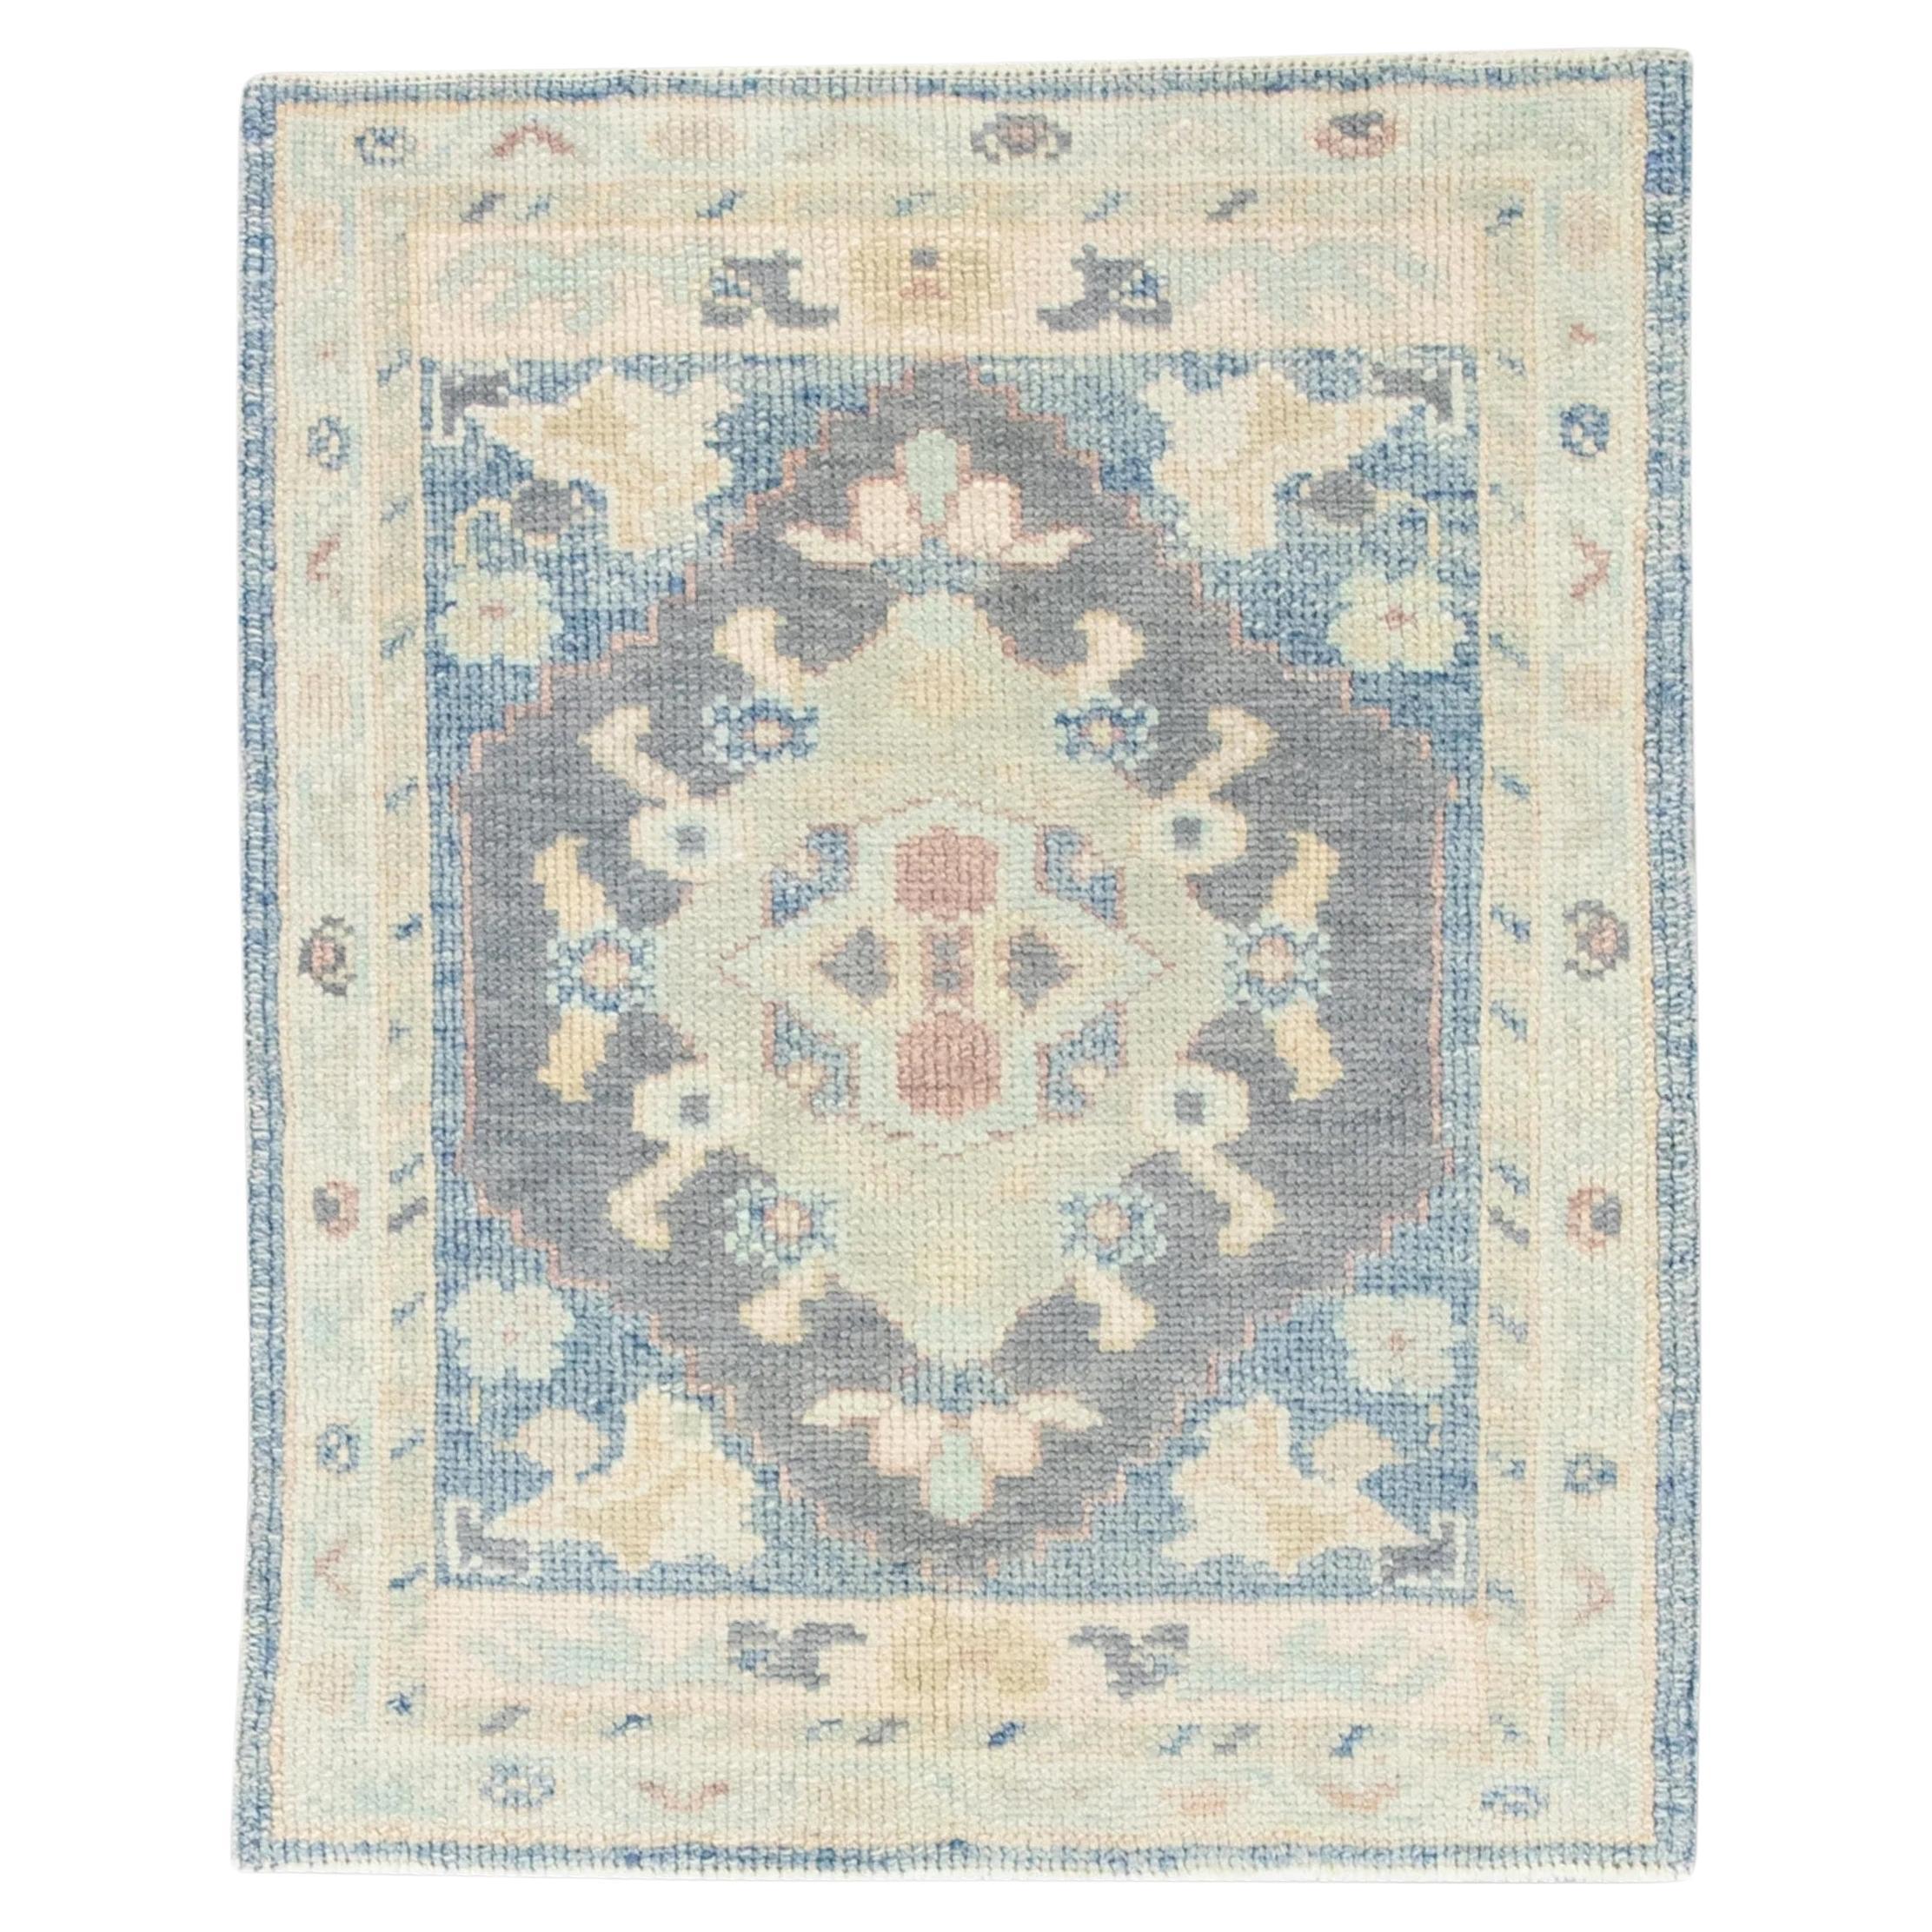 Green and Blue Floral Handwoven Wool Turkish Oushak Rug 2'4" x 2'11" For Sale